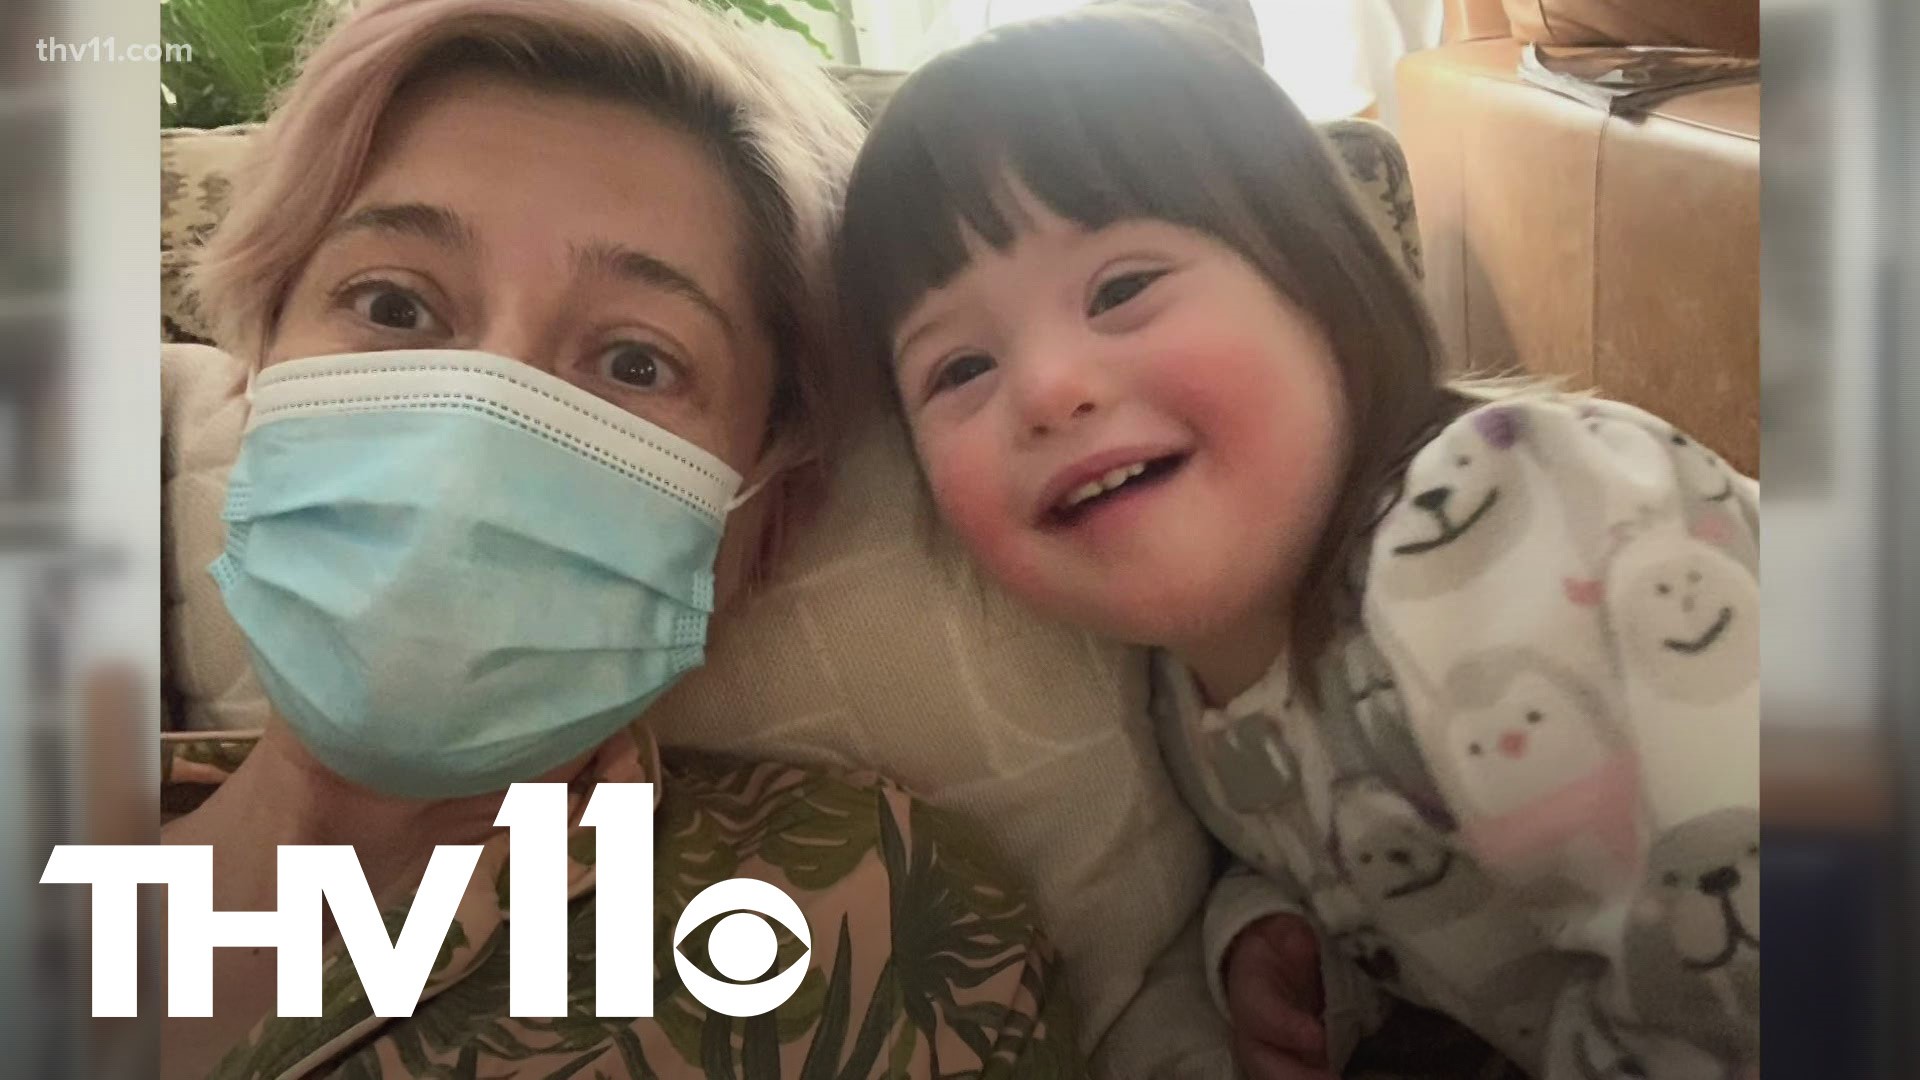 Since she has antibodies in her system, Katie Smith wants to lend a helping hand to a mother who contracts COVID-19 and has to still take care of children.